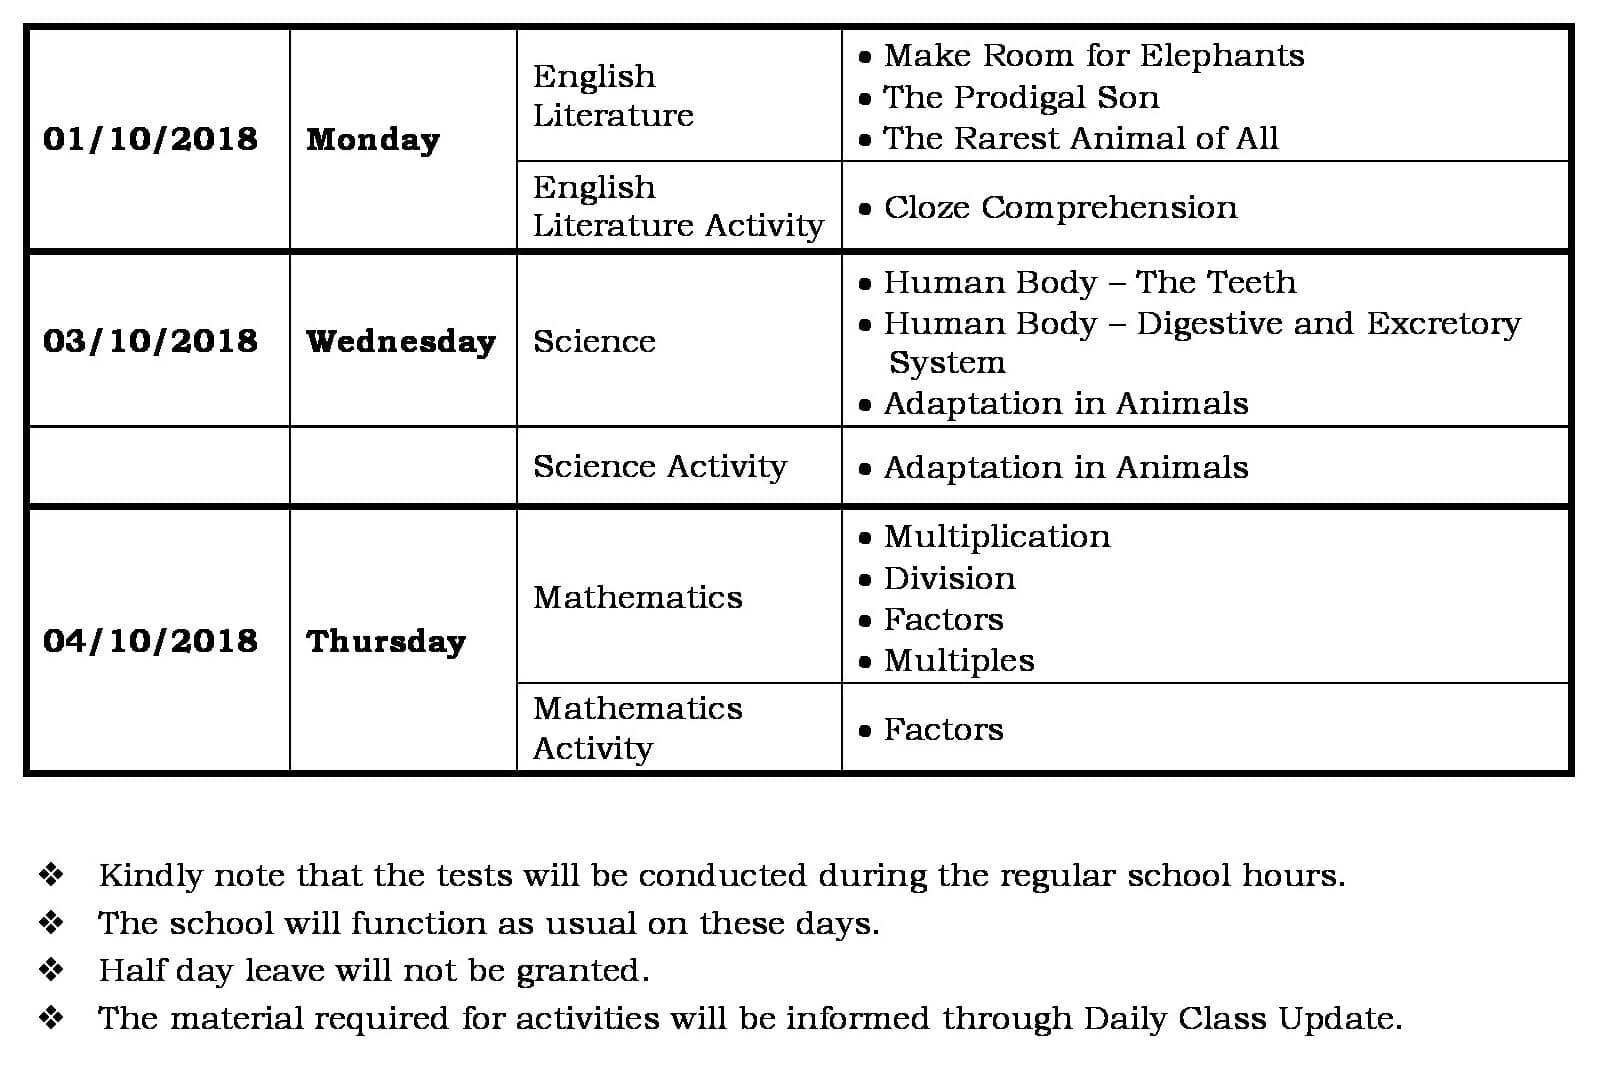 FA 2- Portion and Schedule